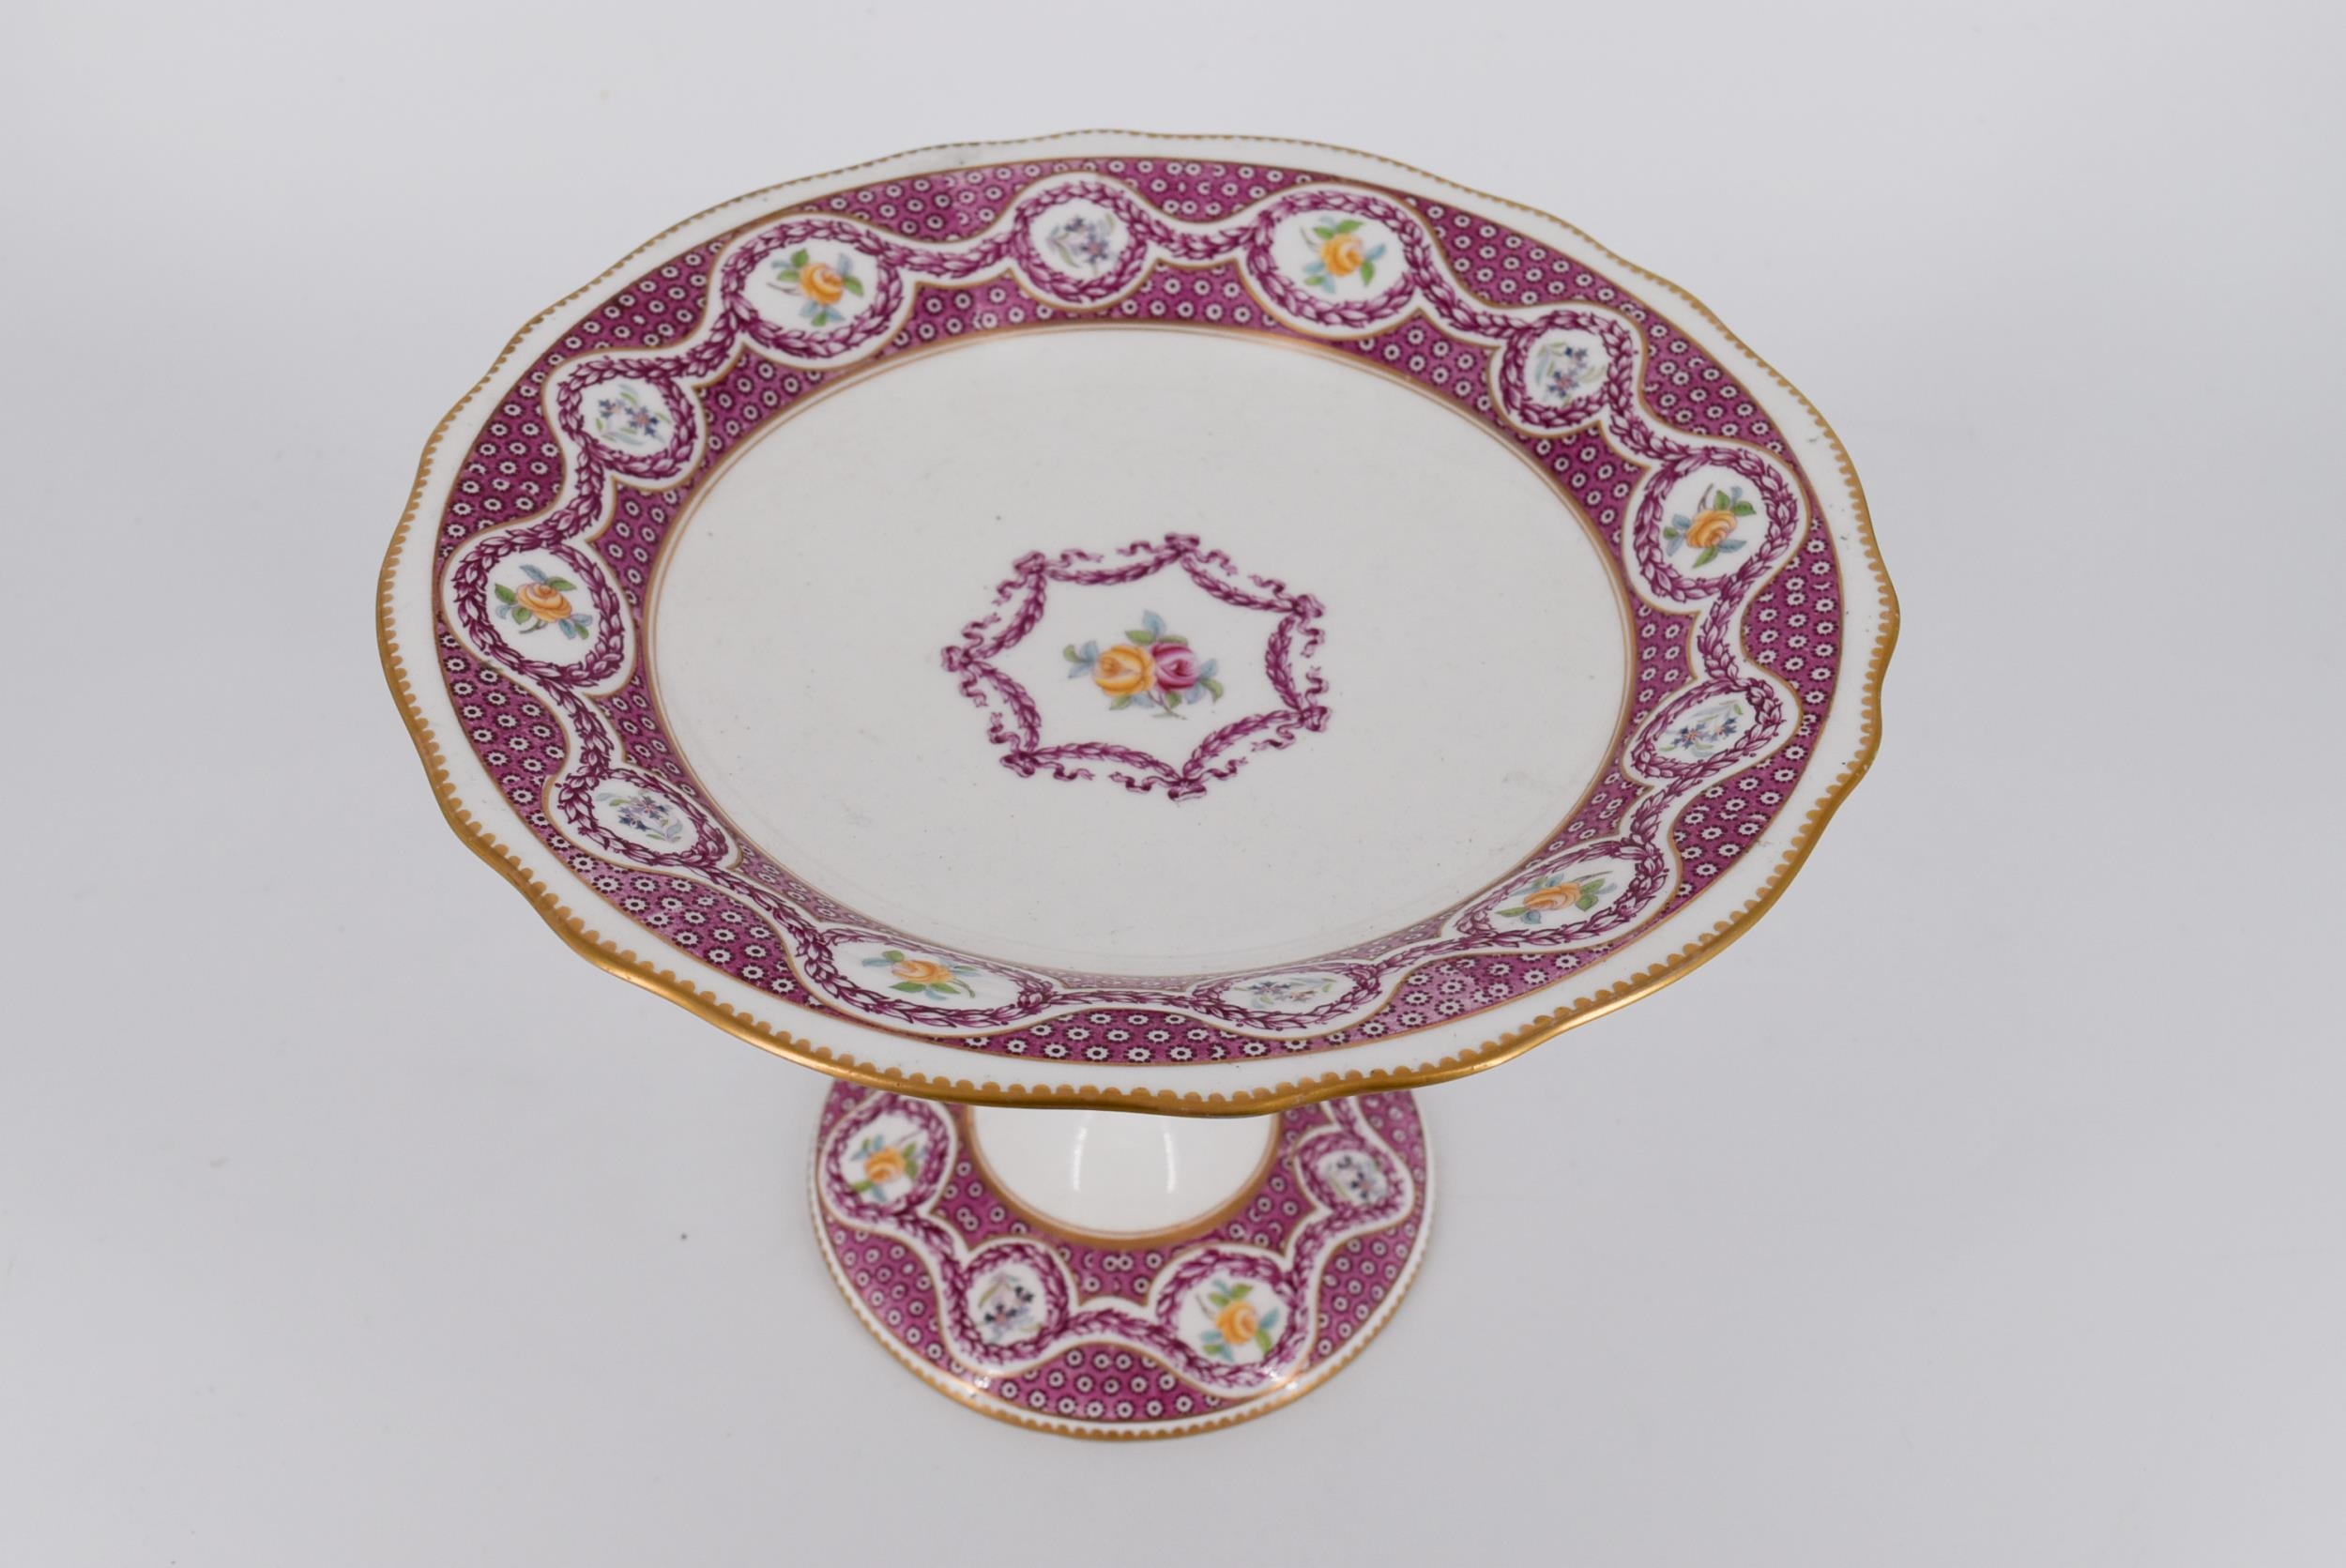 A 20th century Chinese porcelain bowl with dragon decoration along with a rose design and gilded - Image 6 of 7